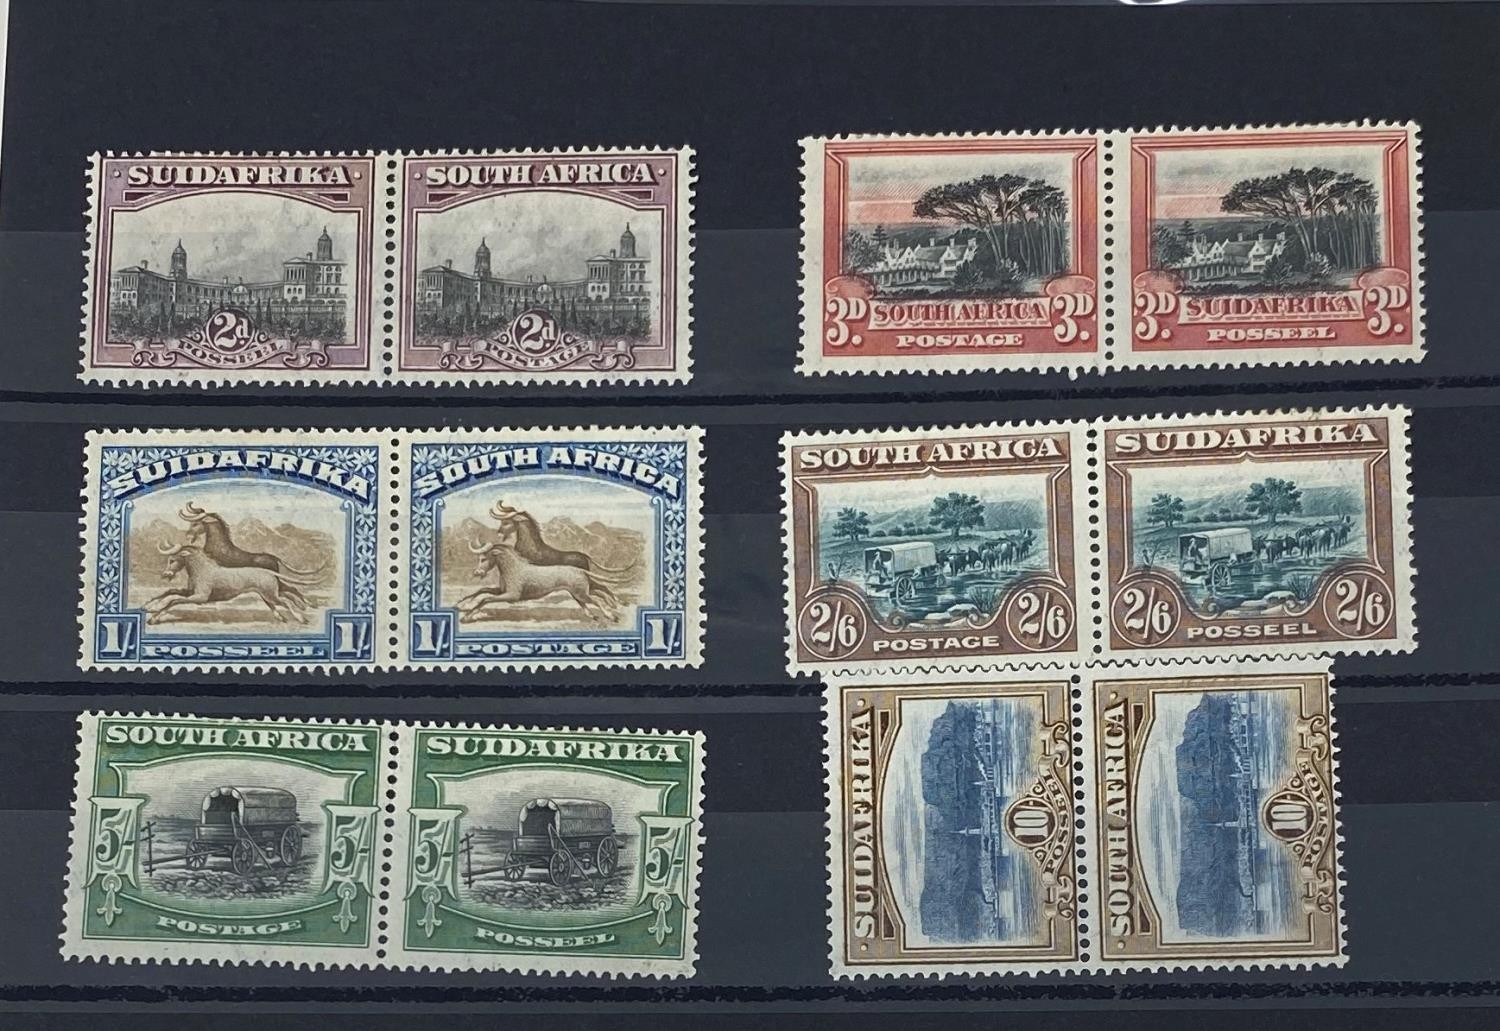 South Africa 1927-30 Pictorial issue 2d, 3d, 1/-, 2/6. 5/-and 10/-hinged pairs, (5/some perf